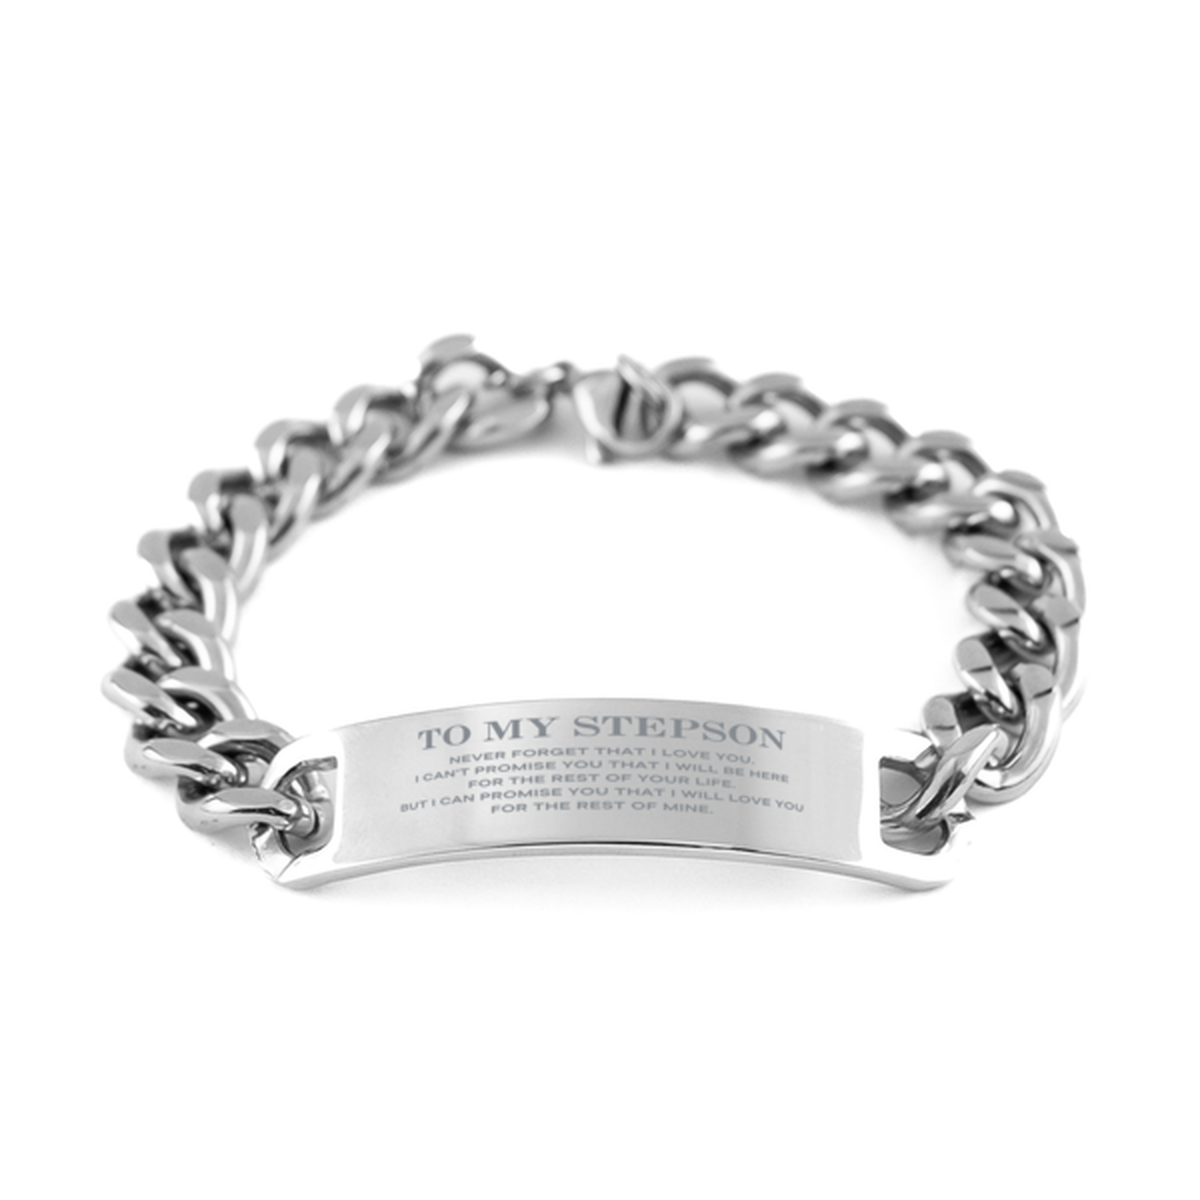 To My Stepson Gifts, I will love you for the rest of mine, Love Stepson Bracelet, Birthday Christmas Unique Cuban Chain Stainless Steel Bracelet For Stepson